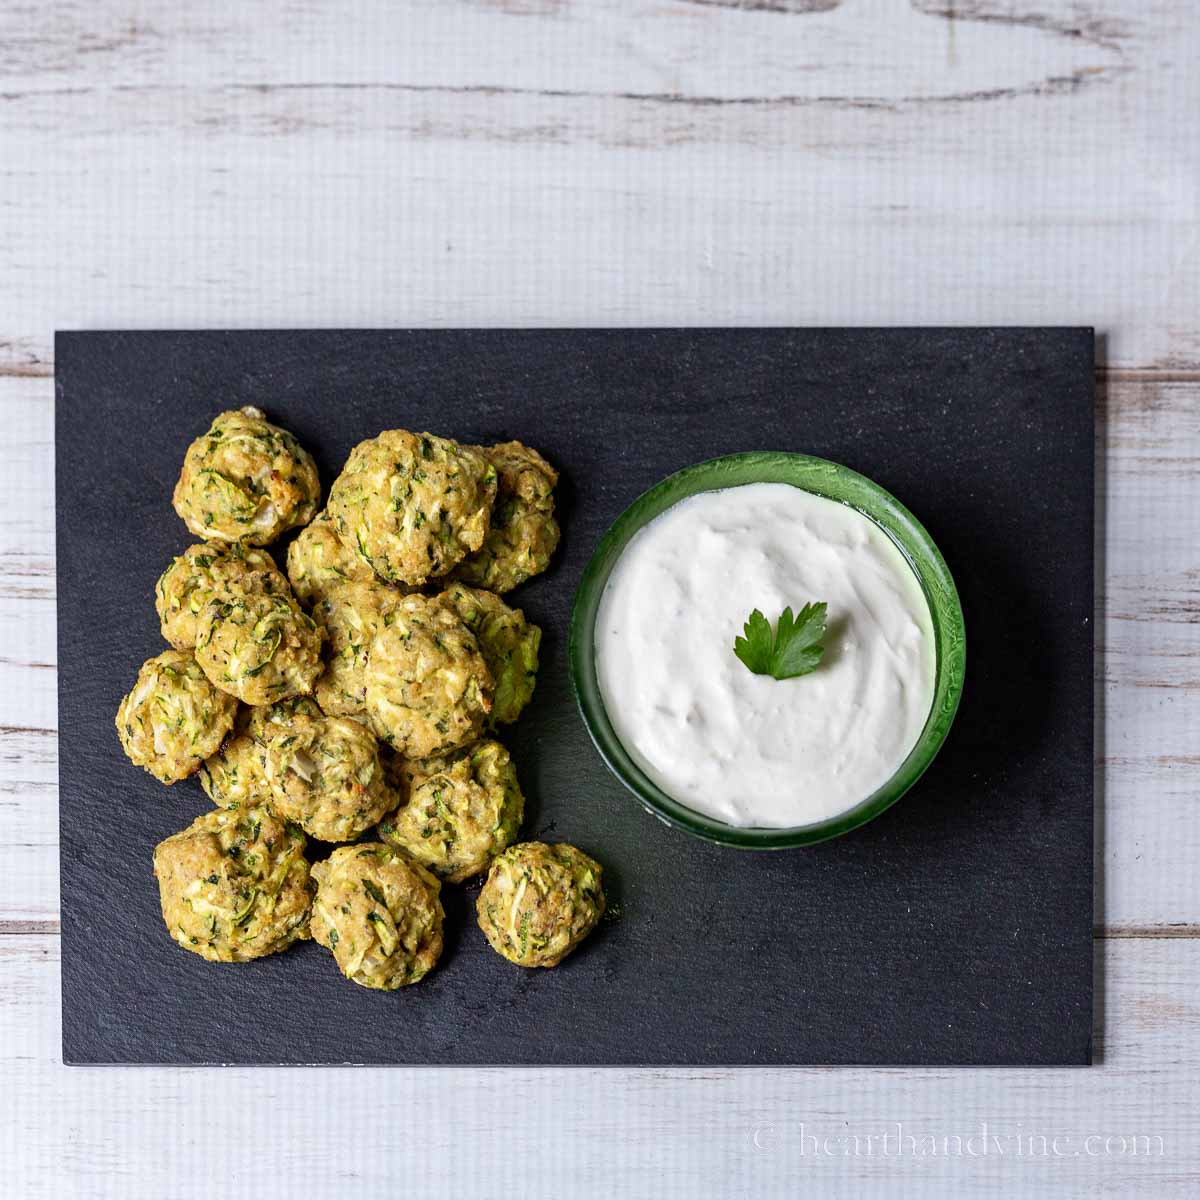 Baked zucchini bite on a slated tray with a bowl of horseradish sauce.